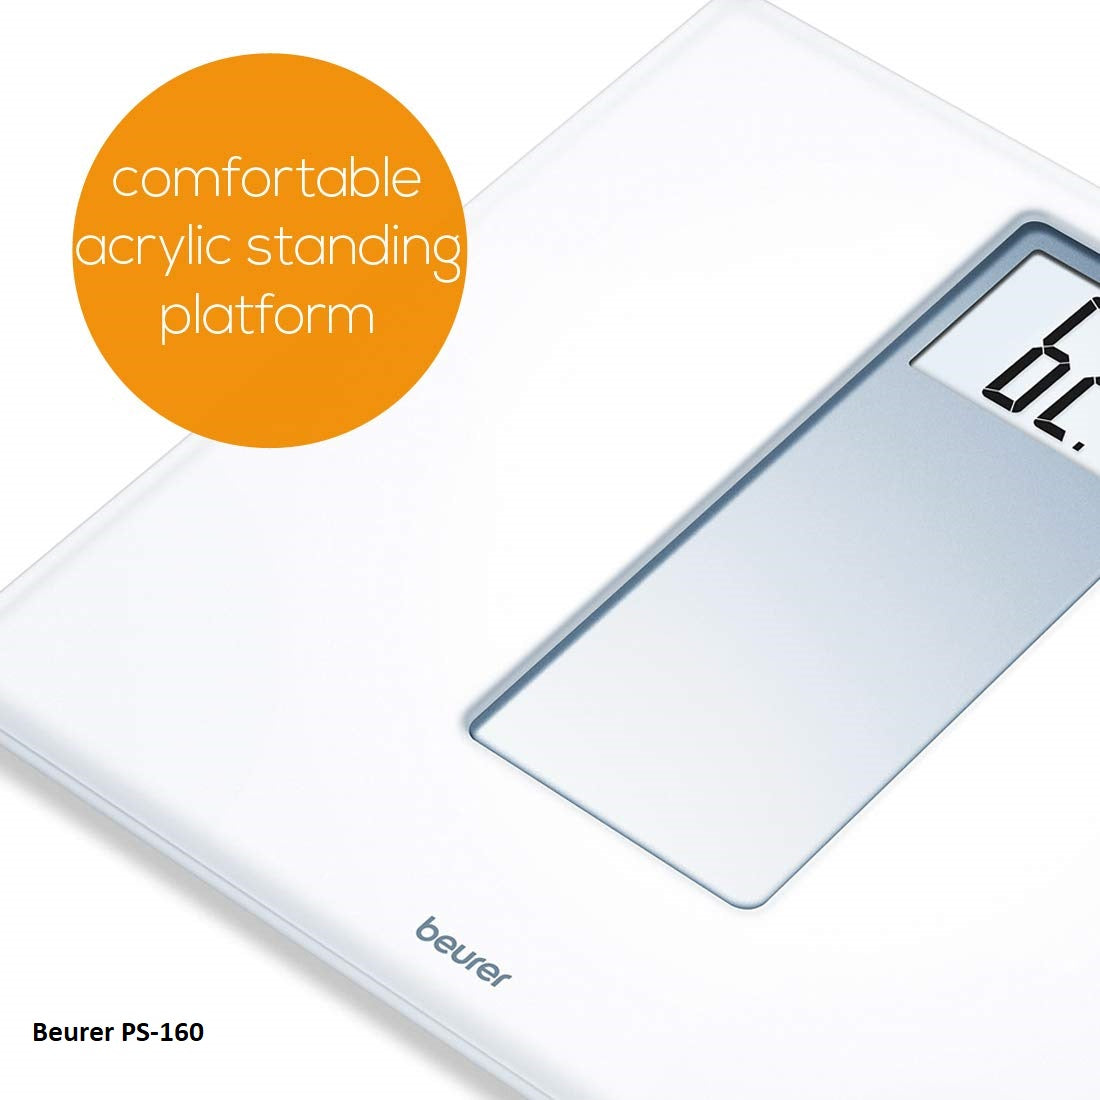 Beurer Personal Bathroom Scale with Extra Large Display PS160